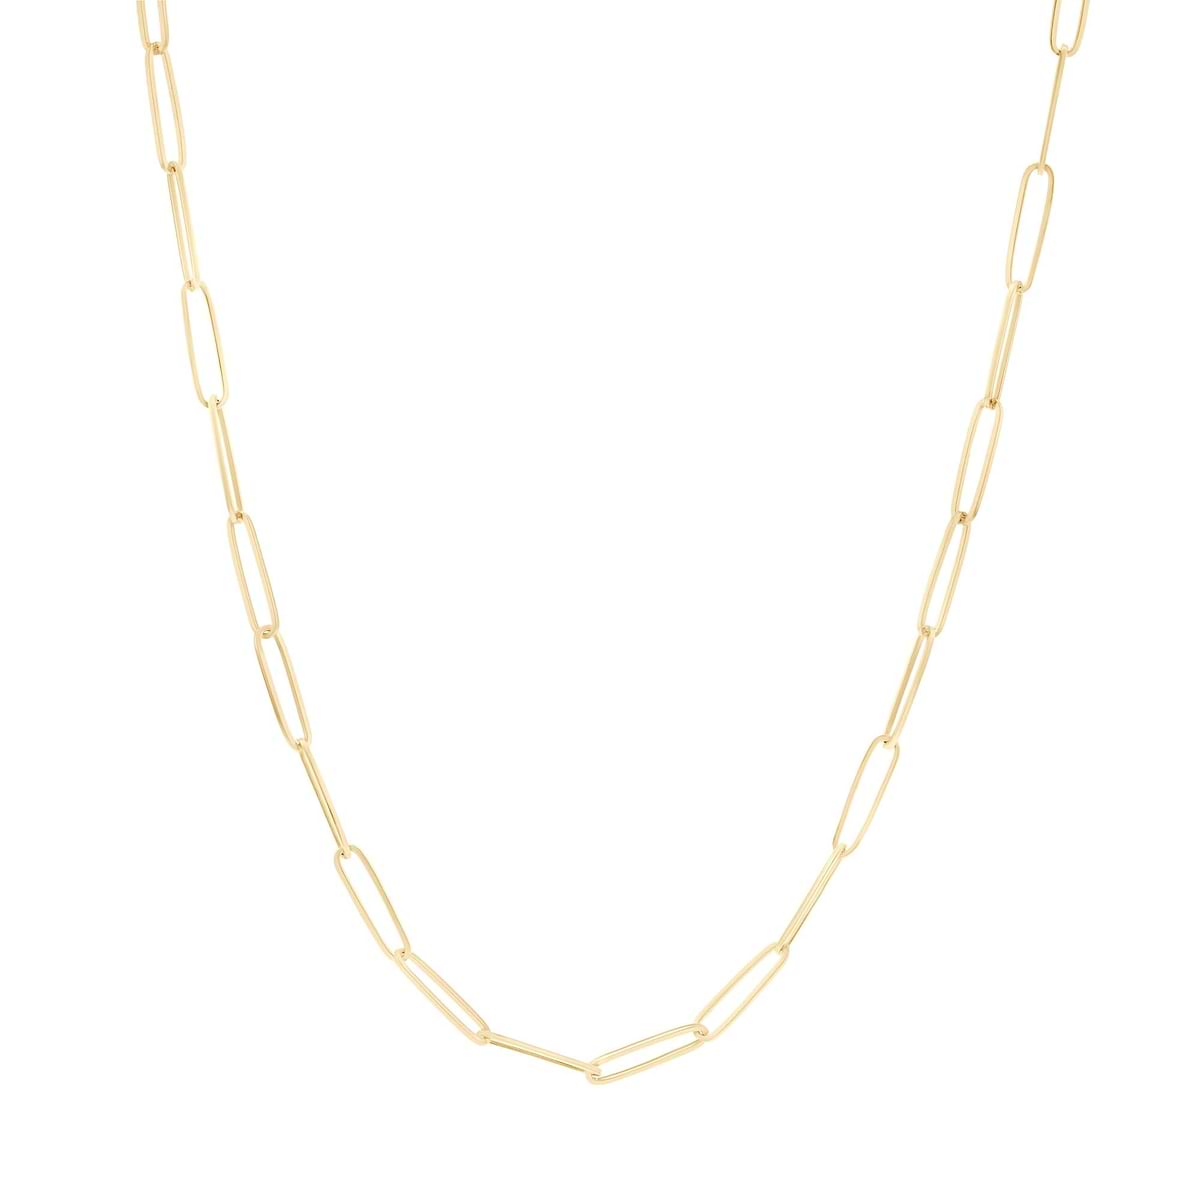 Paperclip Chain Necklace shown in 14K Yellow Gold